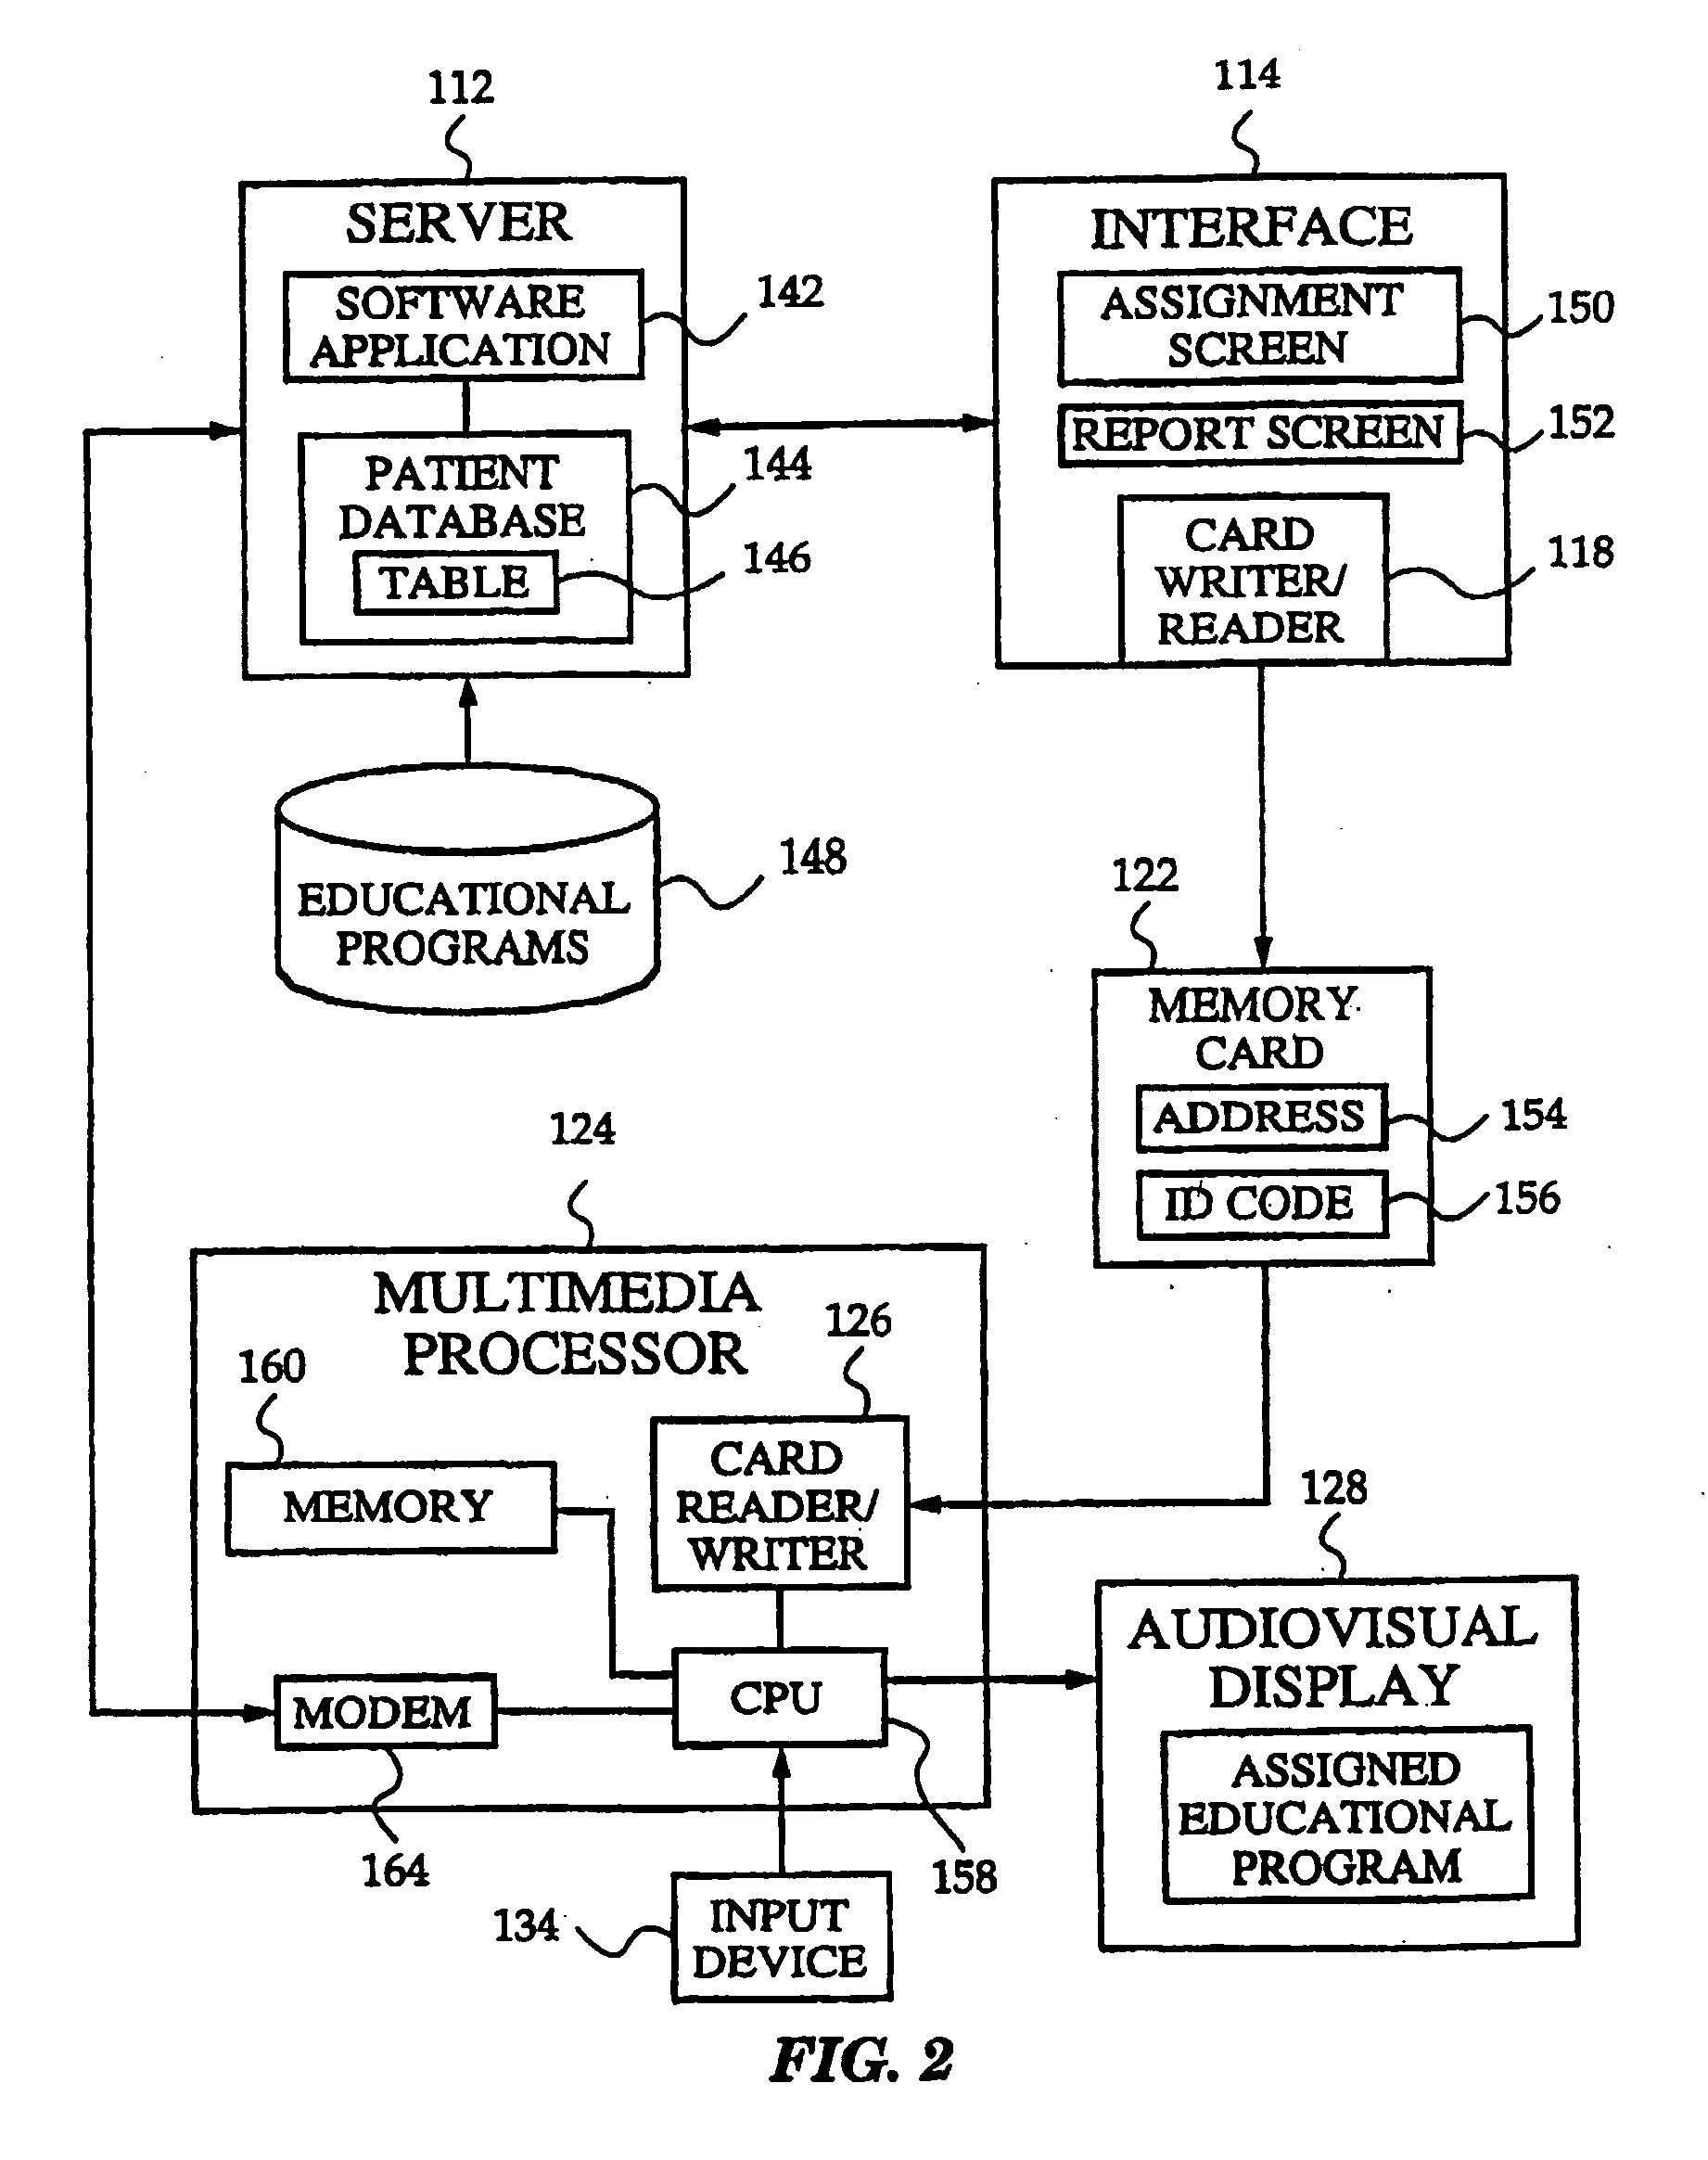 System and method for monitoring a physiological condition